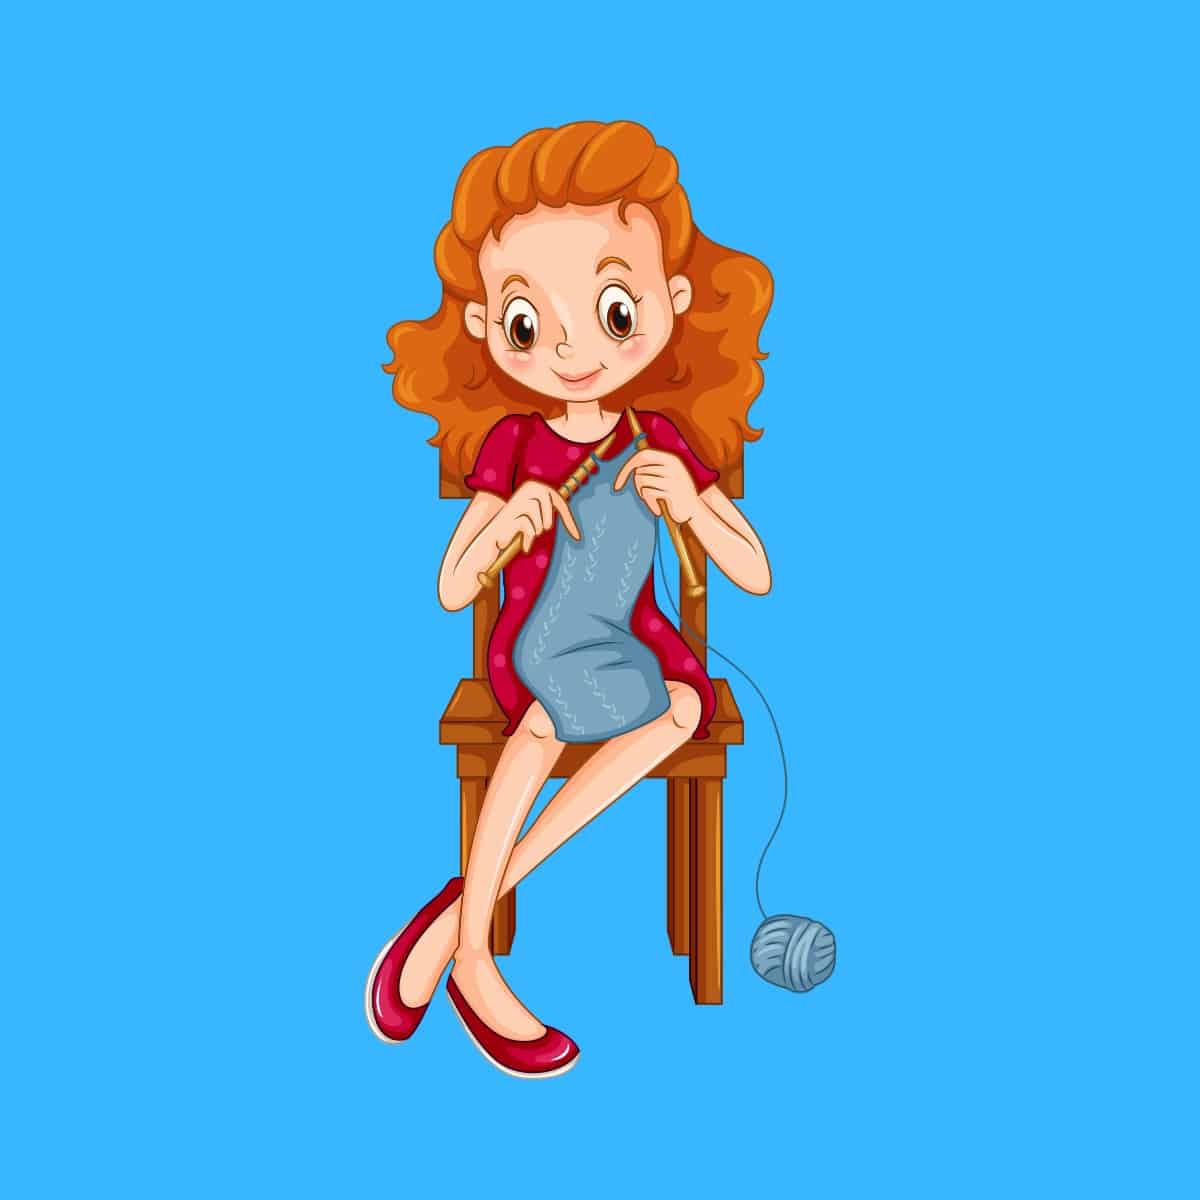 Cartoon graphic of a woman in a seat knitting on blue background.